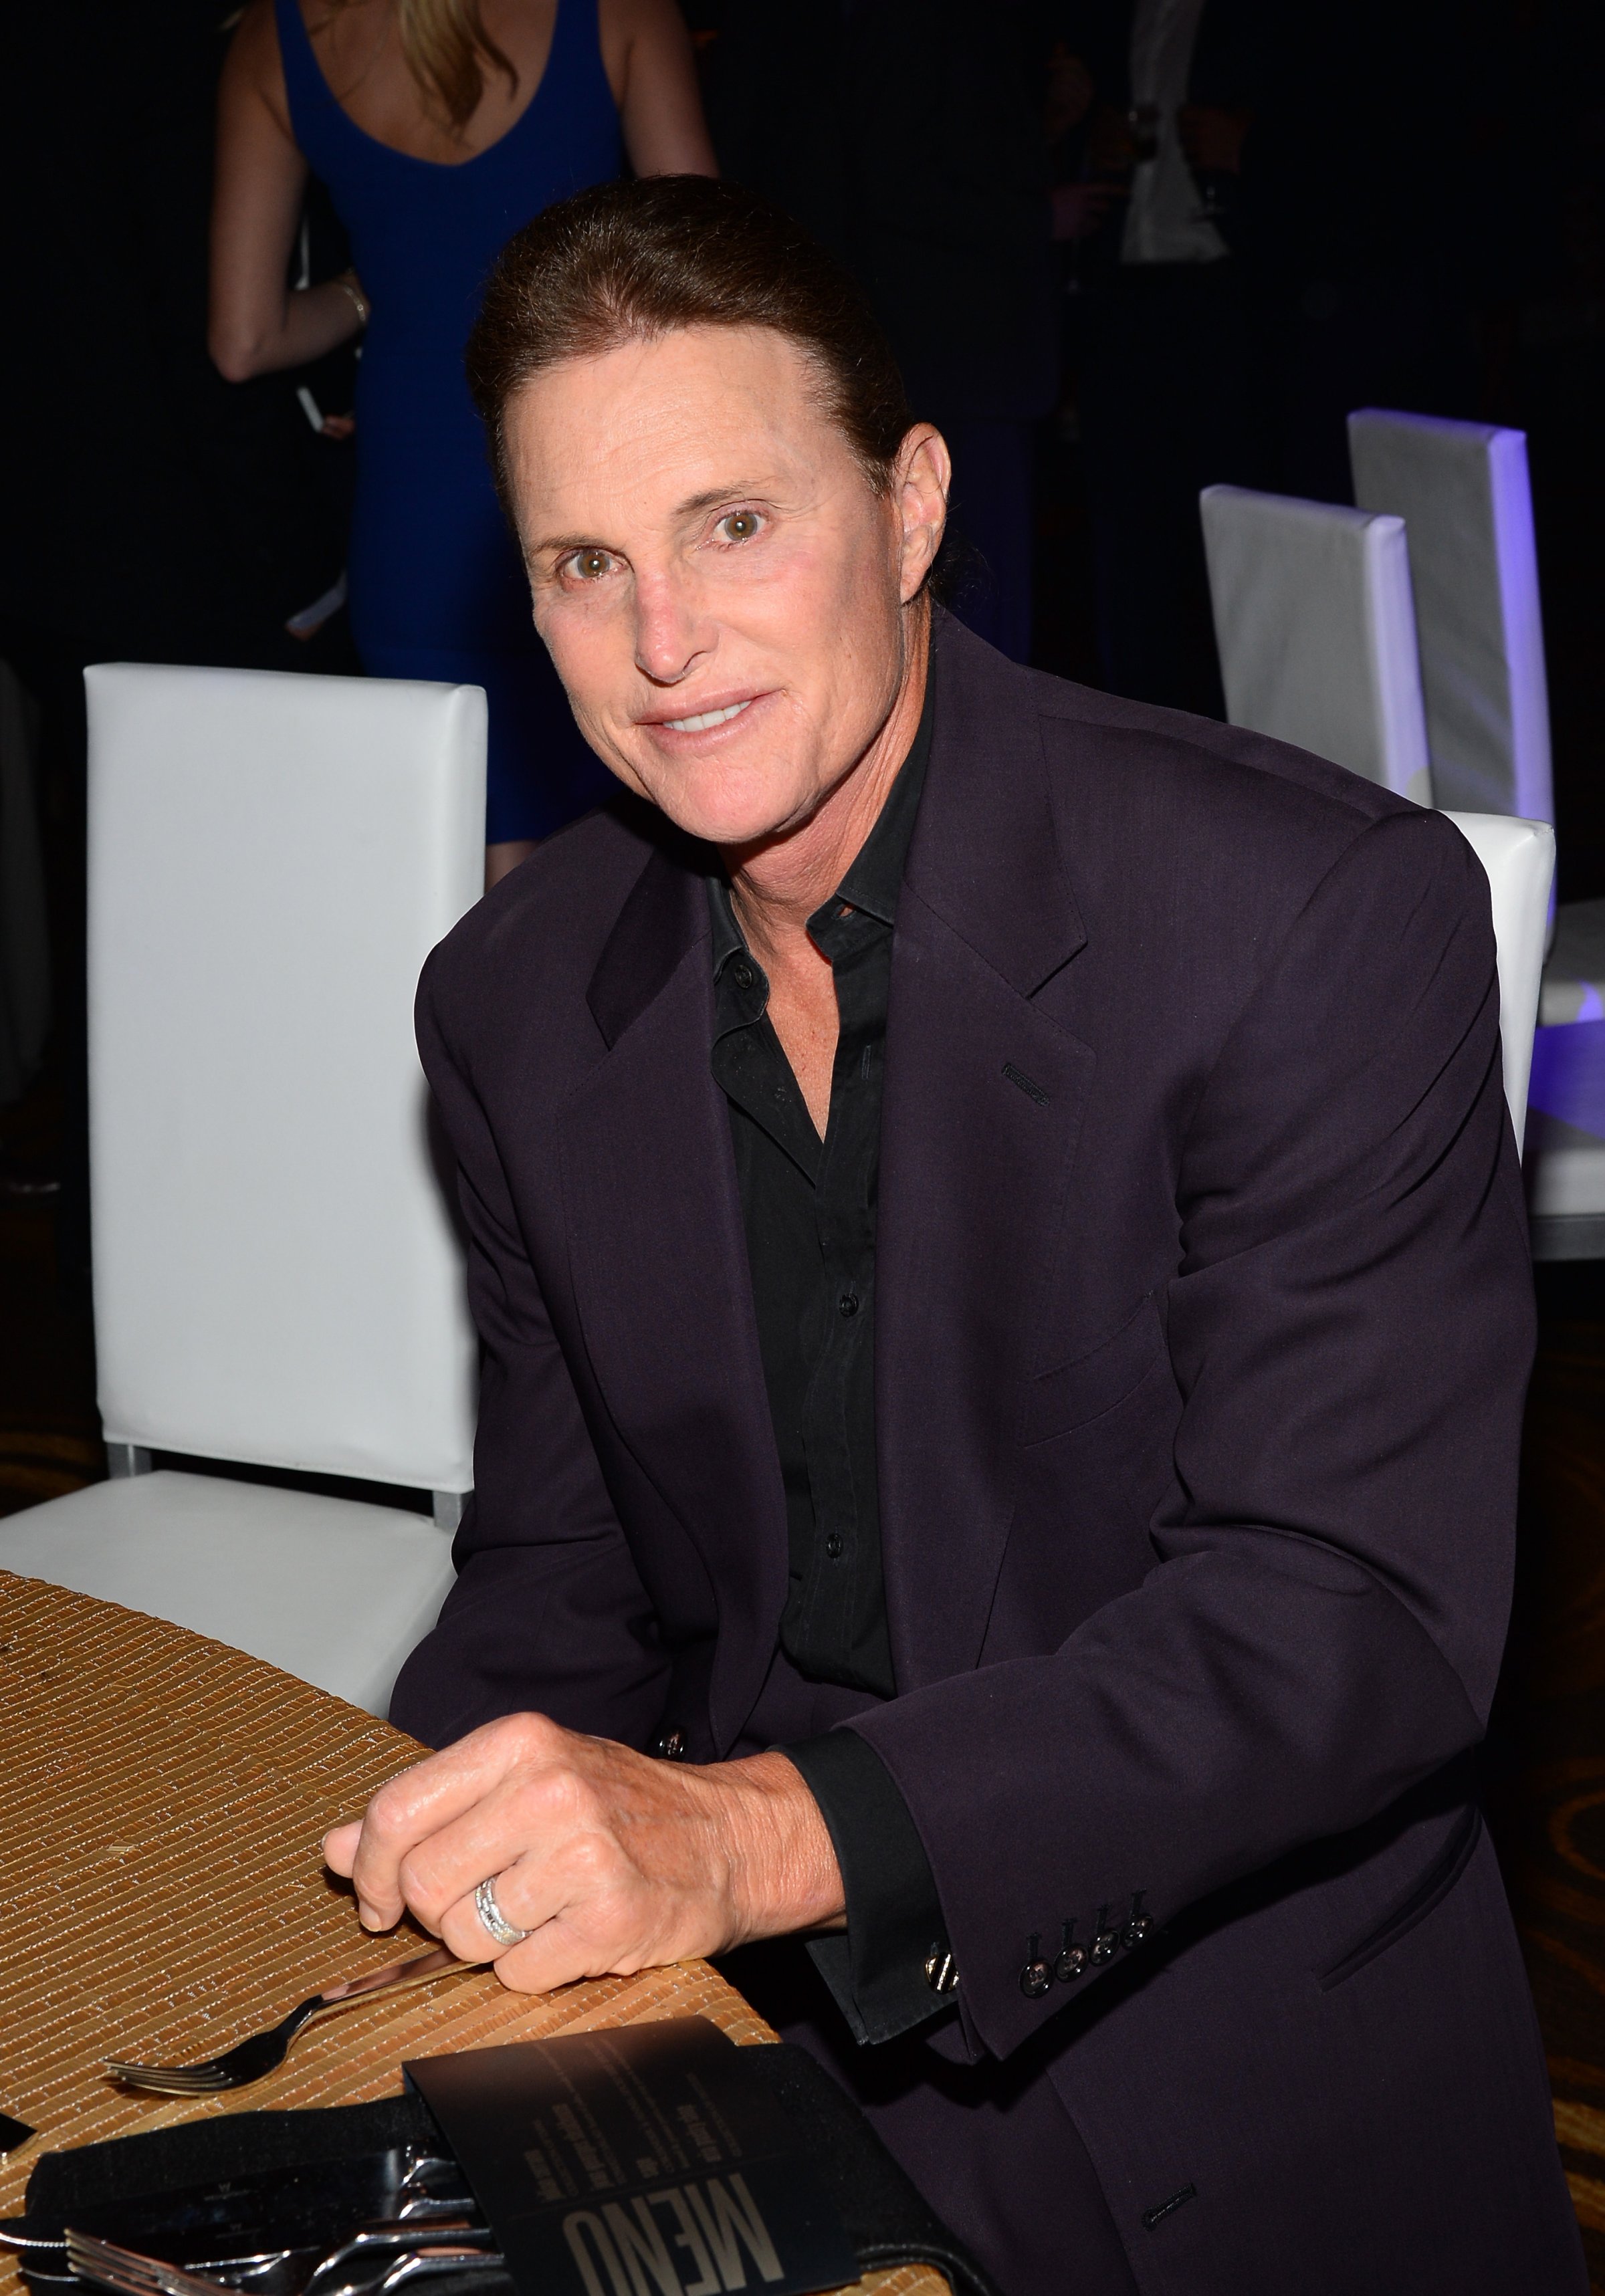 Television personality Bruce Jenner attends the 13th annual Michael Jordan Celebrity Invitational gala on April 4, 2014 in Las Vegas, Nevada.